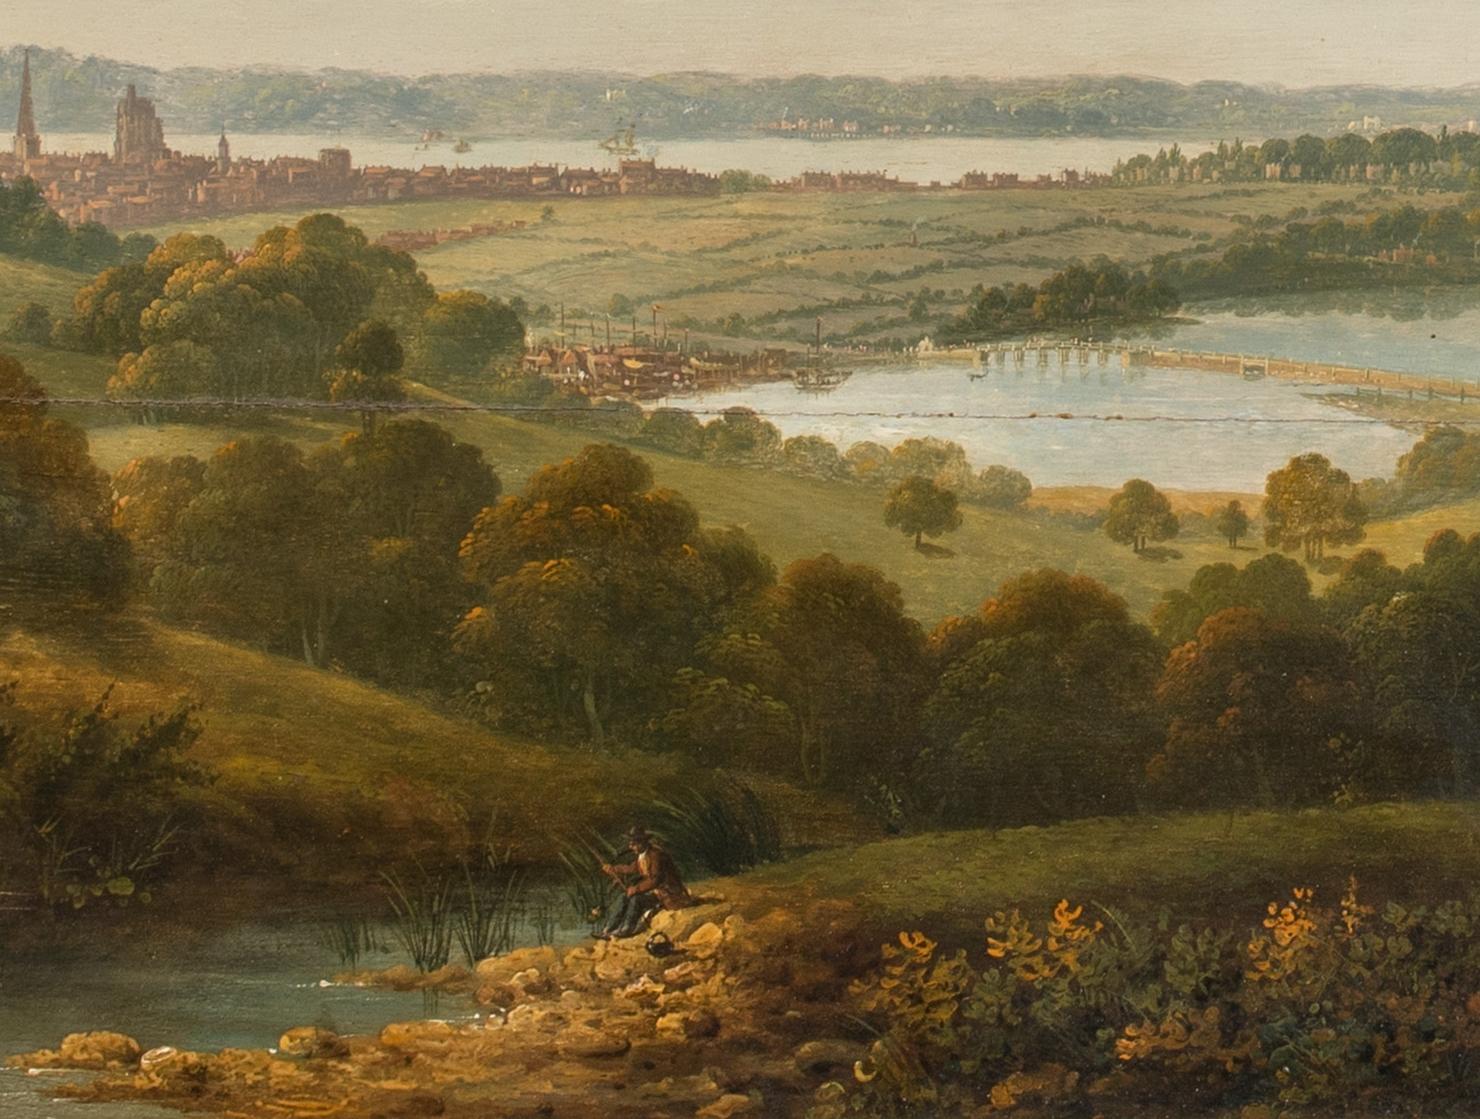 View Of Southampton From The River Itchen and Southampton Water In The Distance, circa 1800

by John Tobias Young (1755-1824)  - rare early view of Southampton

Large circa 1800 view of Southampton from the Rover Itchen, oil on panel by John Tobias